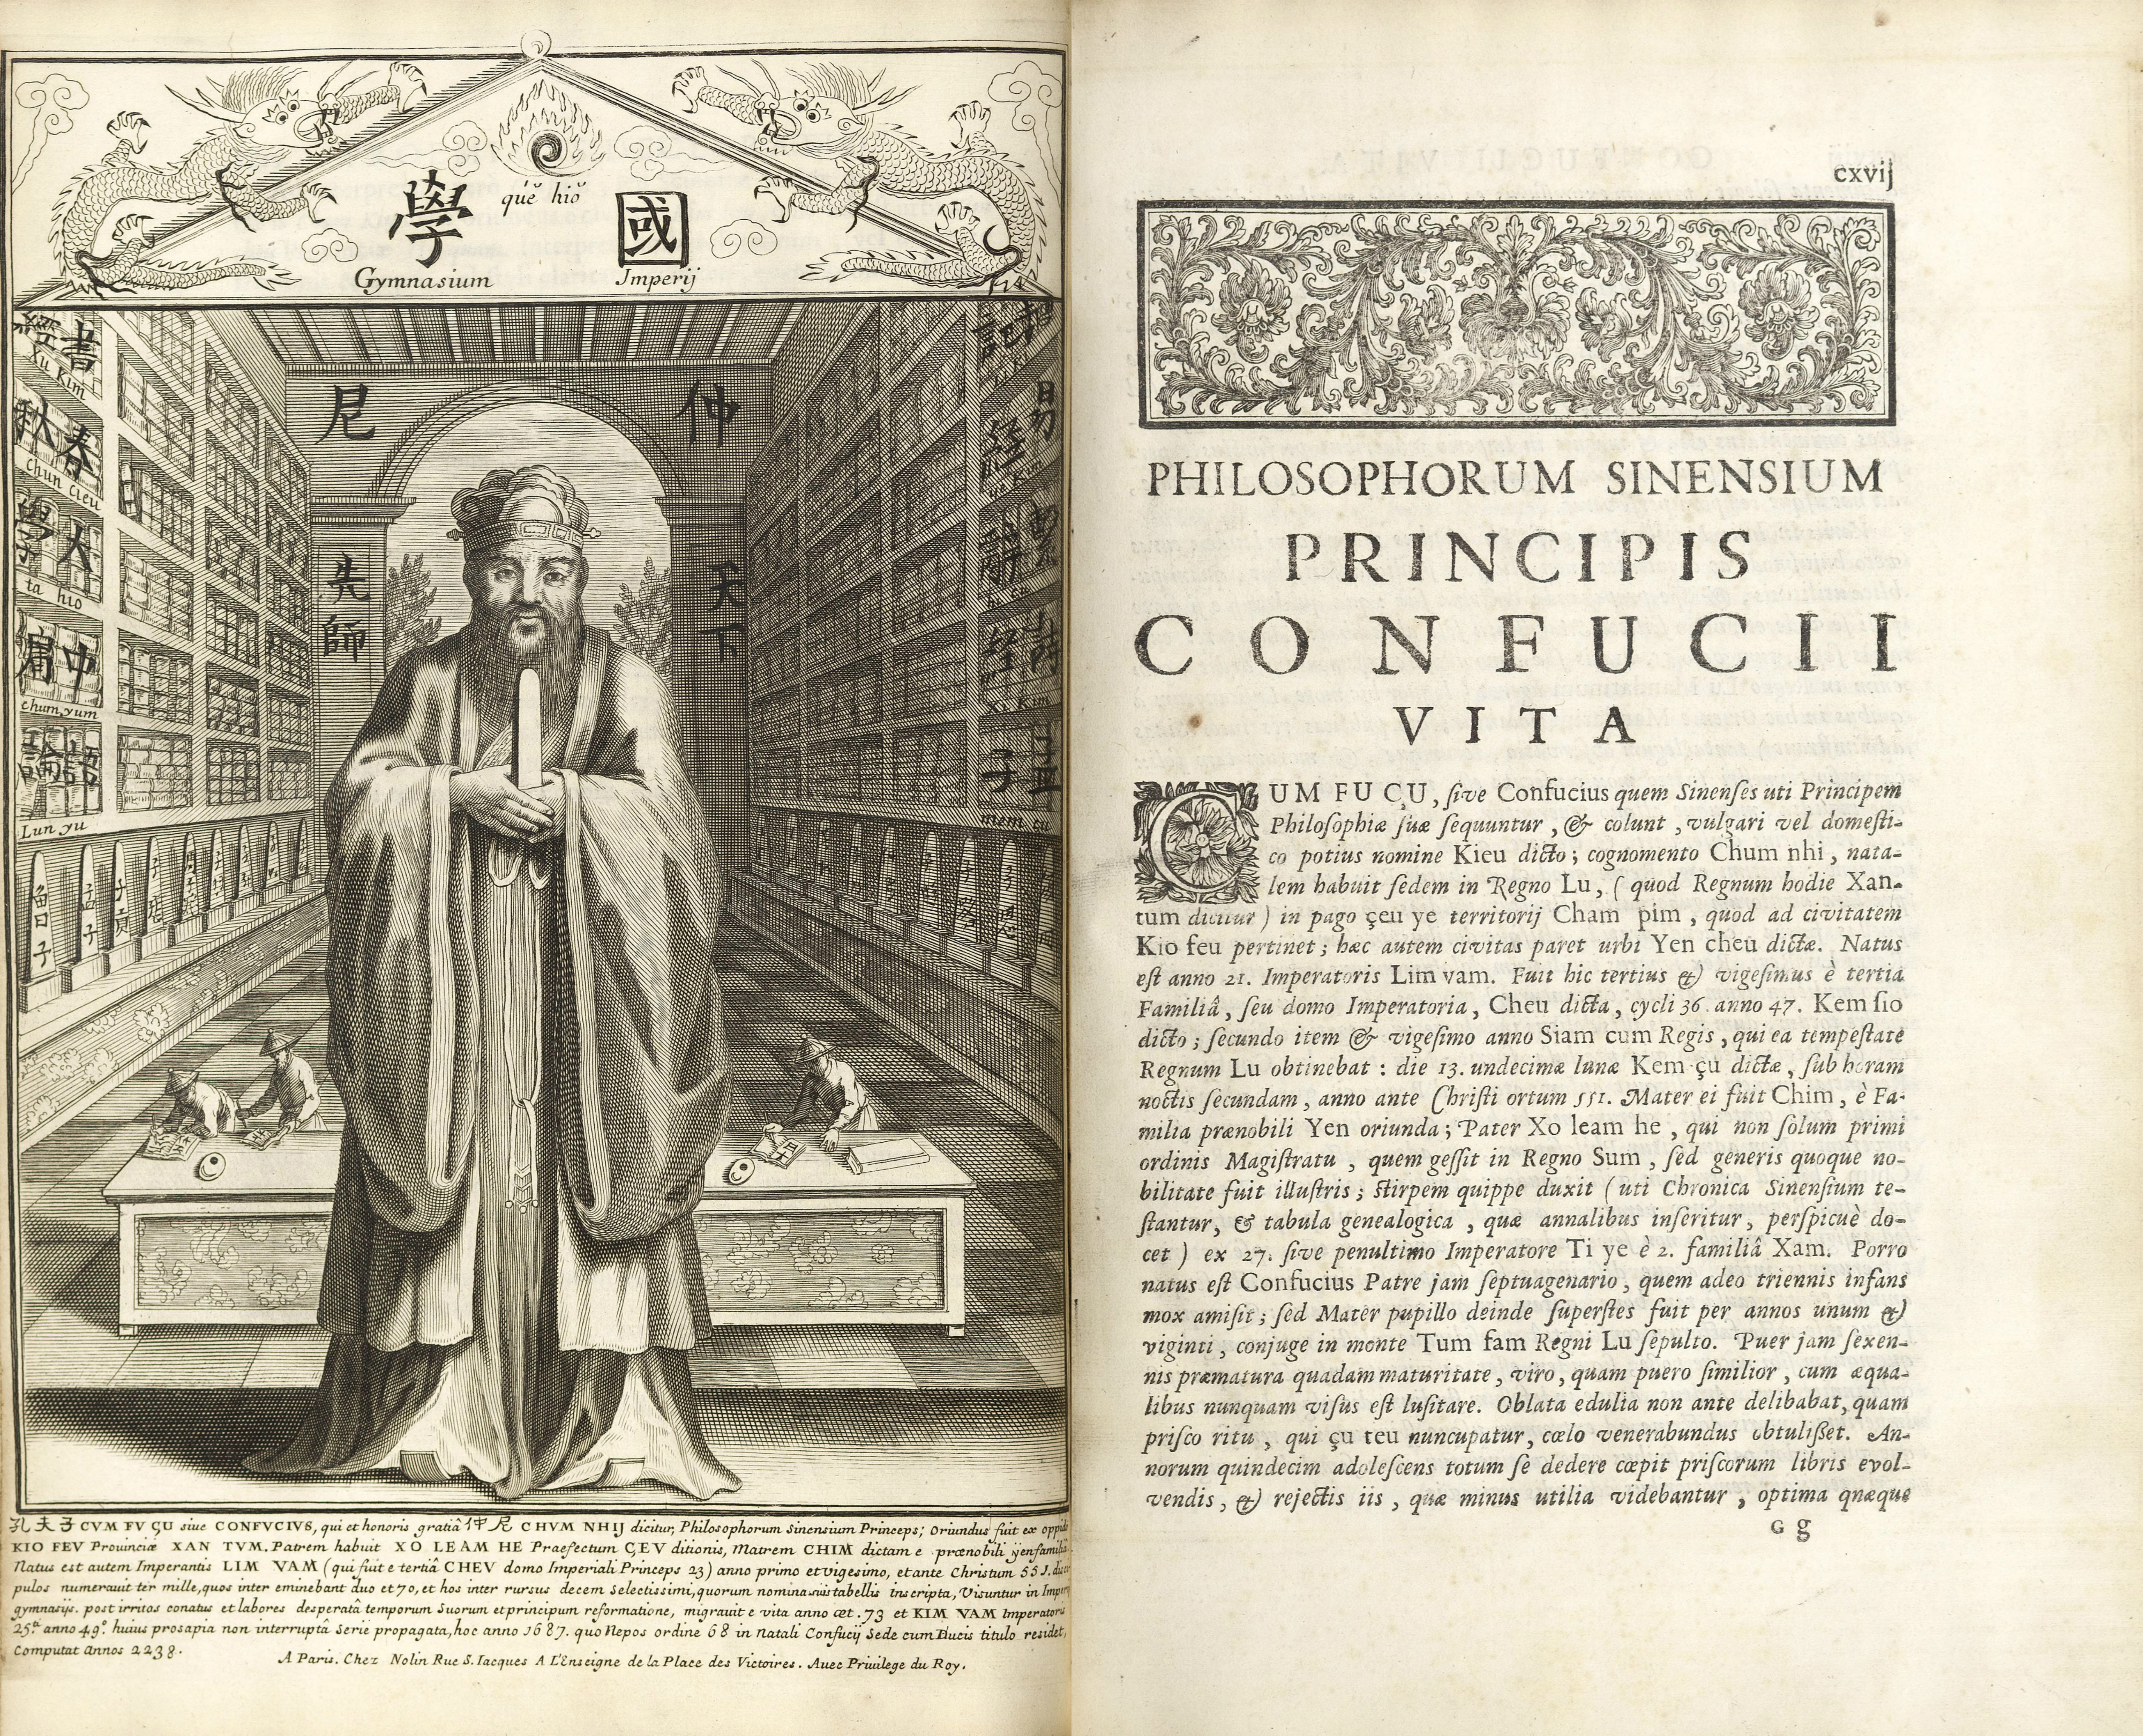 Confucius from a 1687 Catholic guide (in latin)